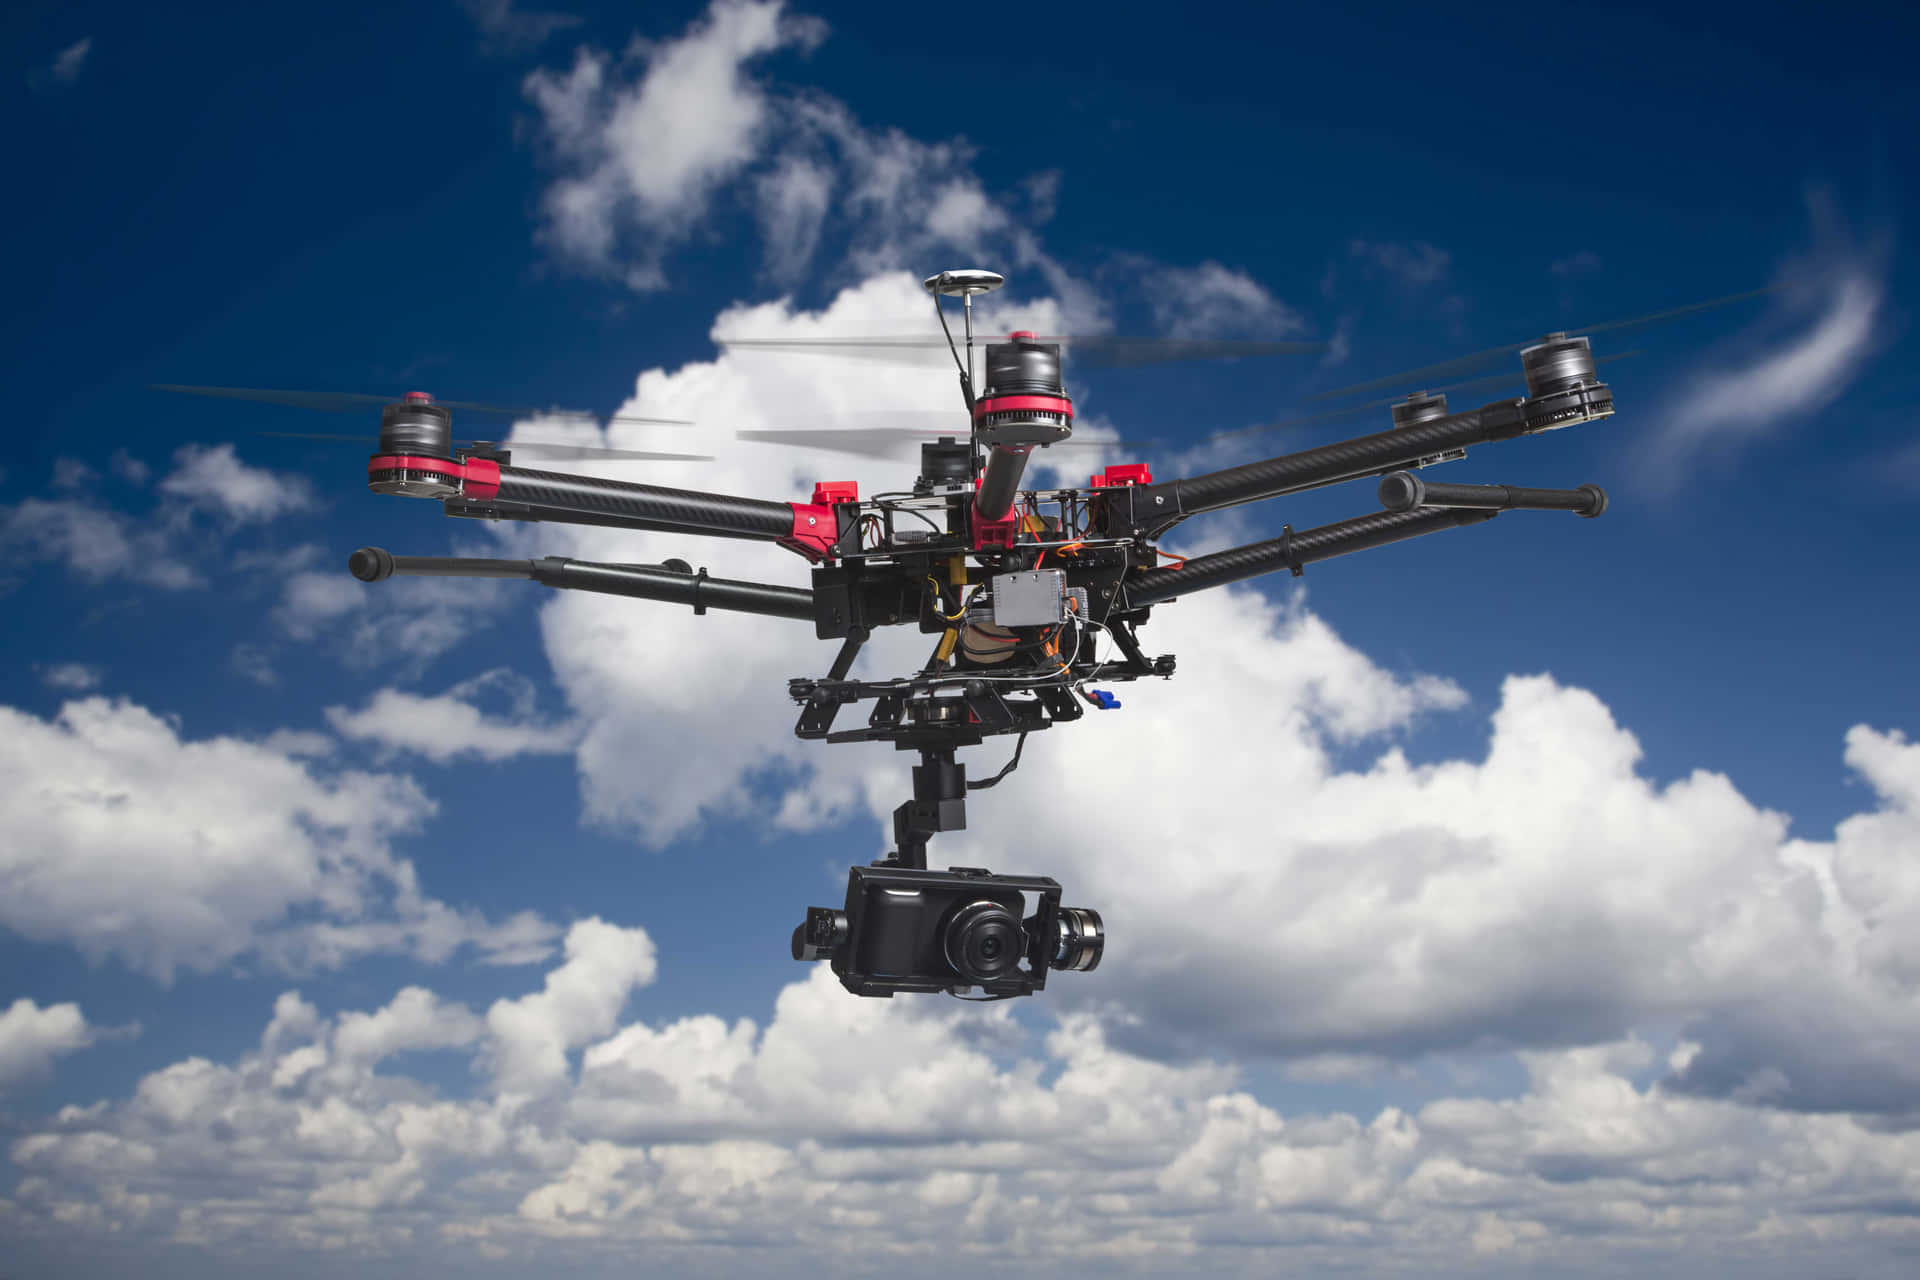 Professional Drone In Flight Against Cloudy Sky Wallpaper